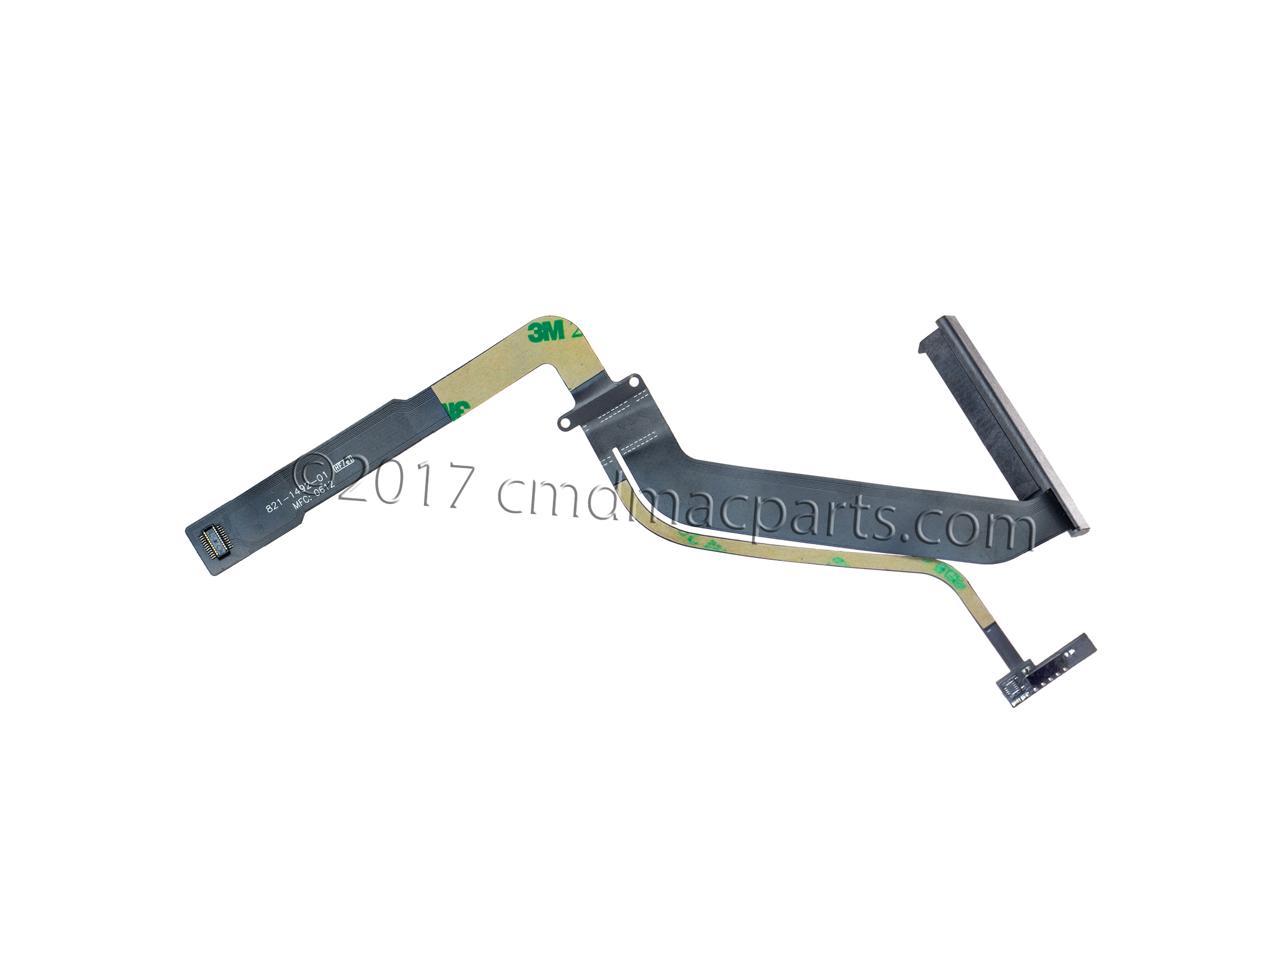 COHK New Hard Drive Flex Cable 821-1492-A for MacBook Pro 15 A1286 Mid 2012